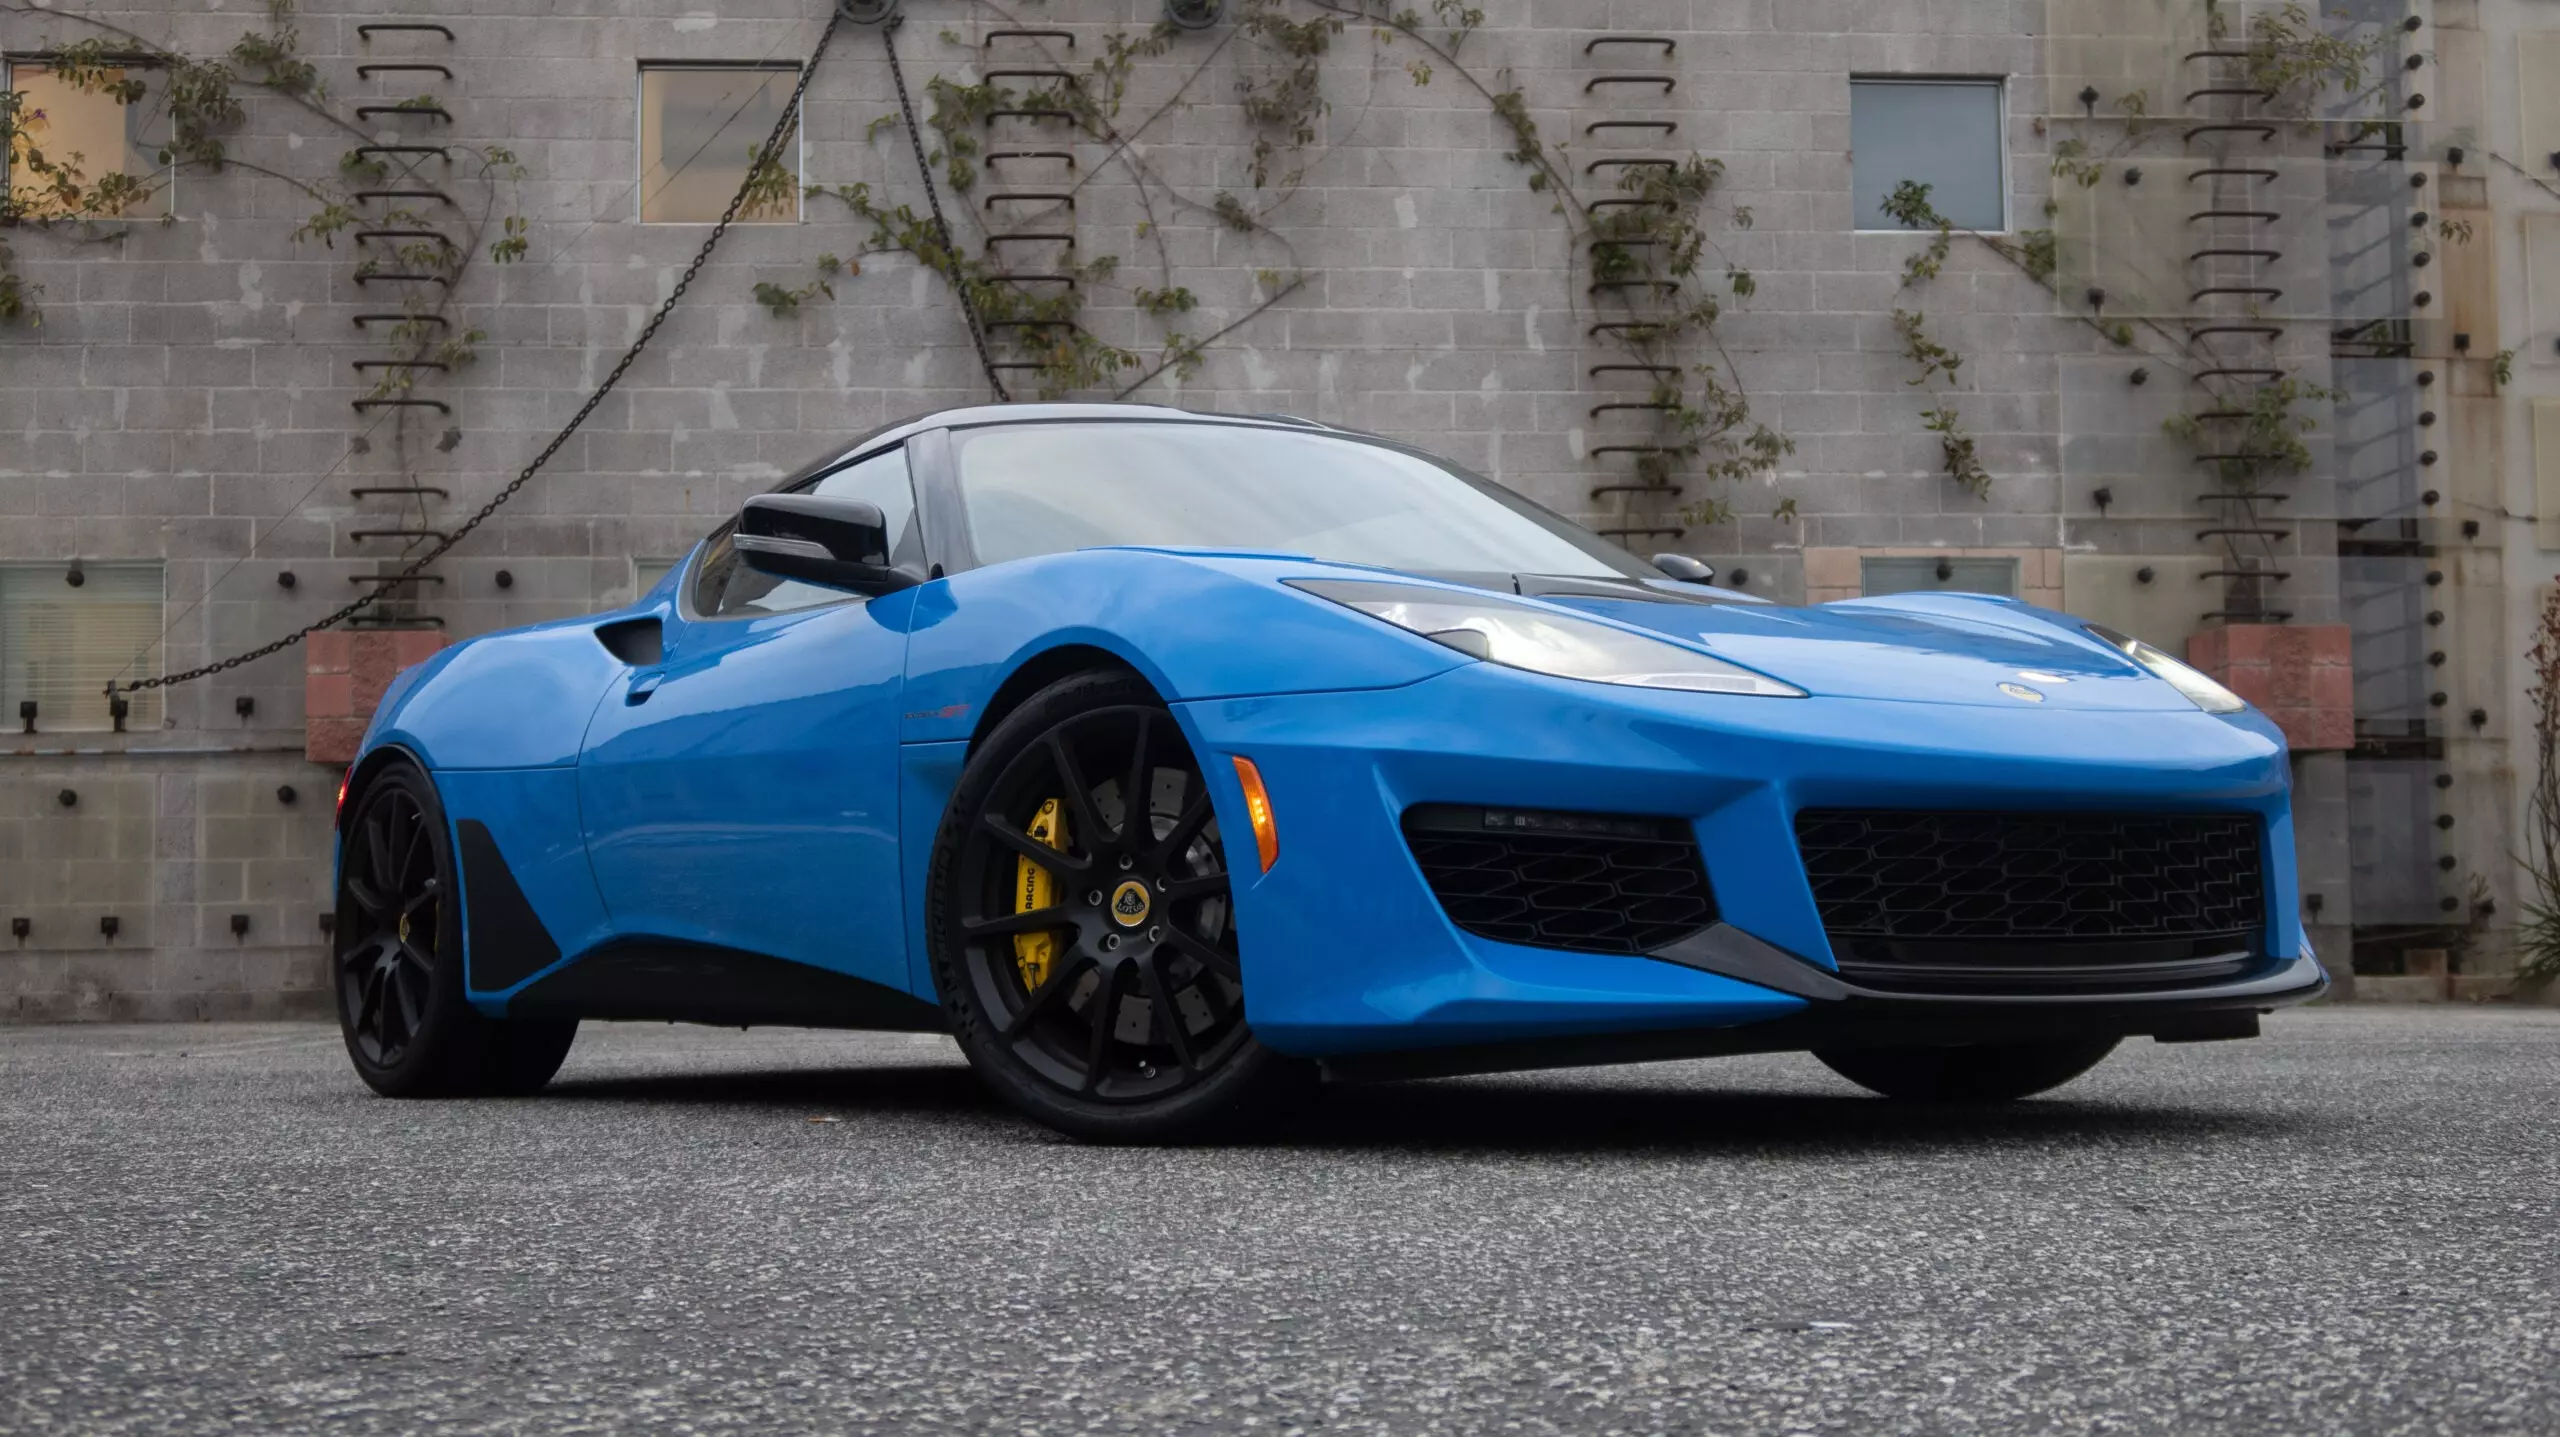 The Lotus Evora GT Is the Last Classic Supercar